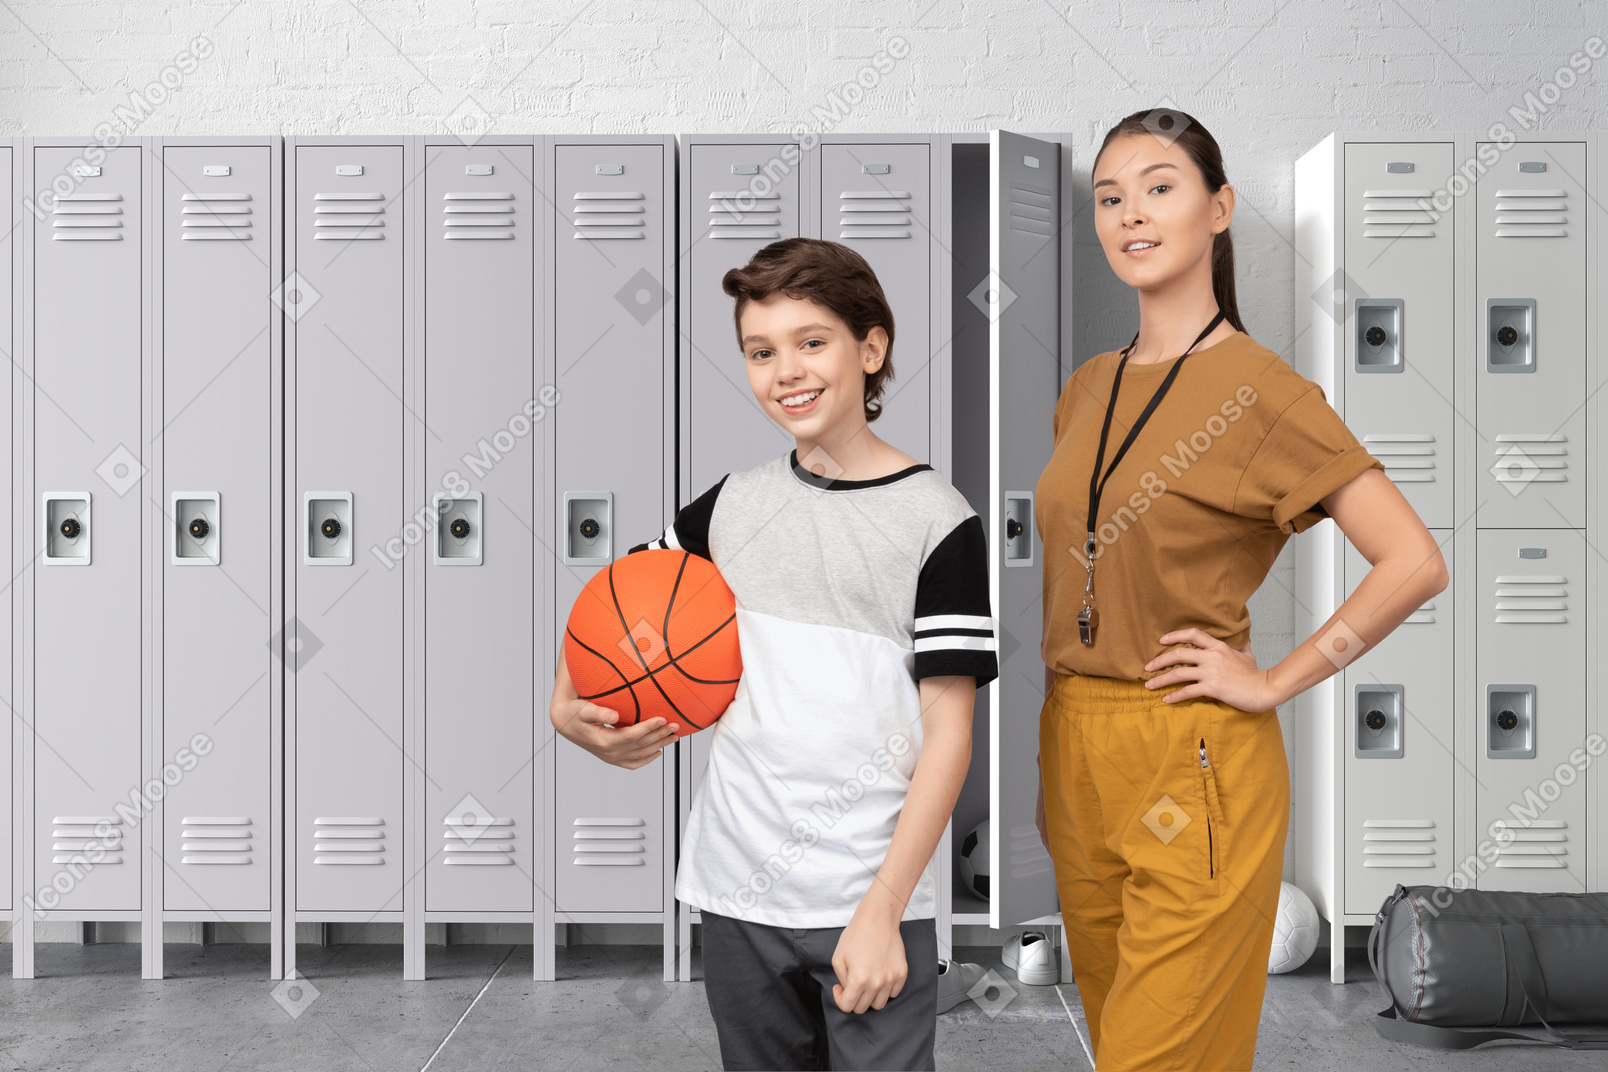 Boy with basketball standing next to female trainer